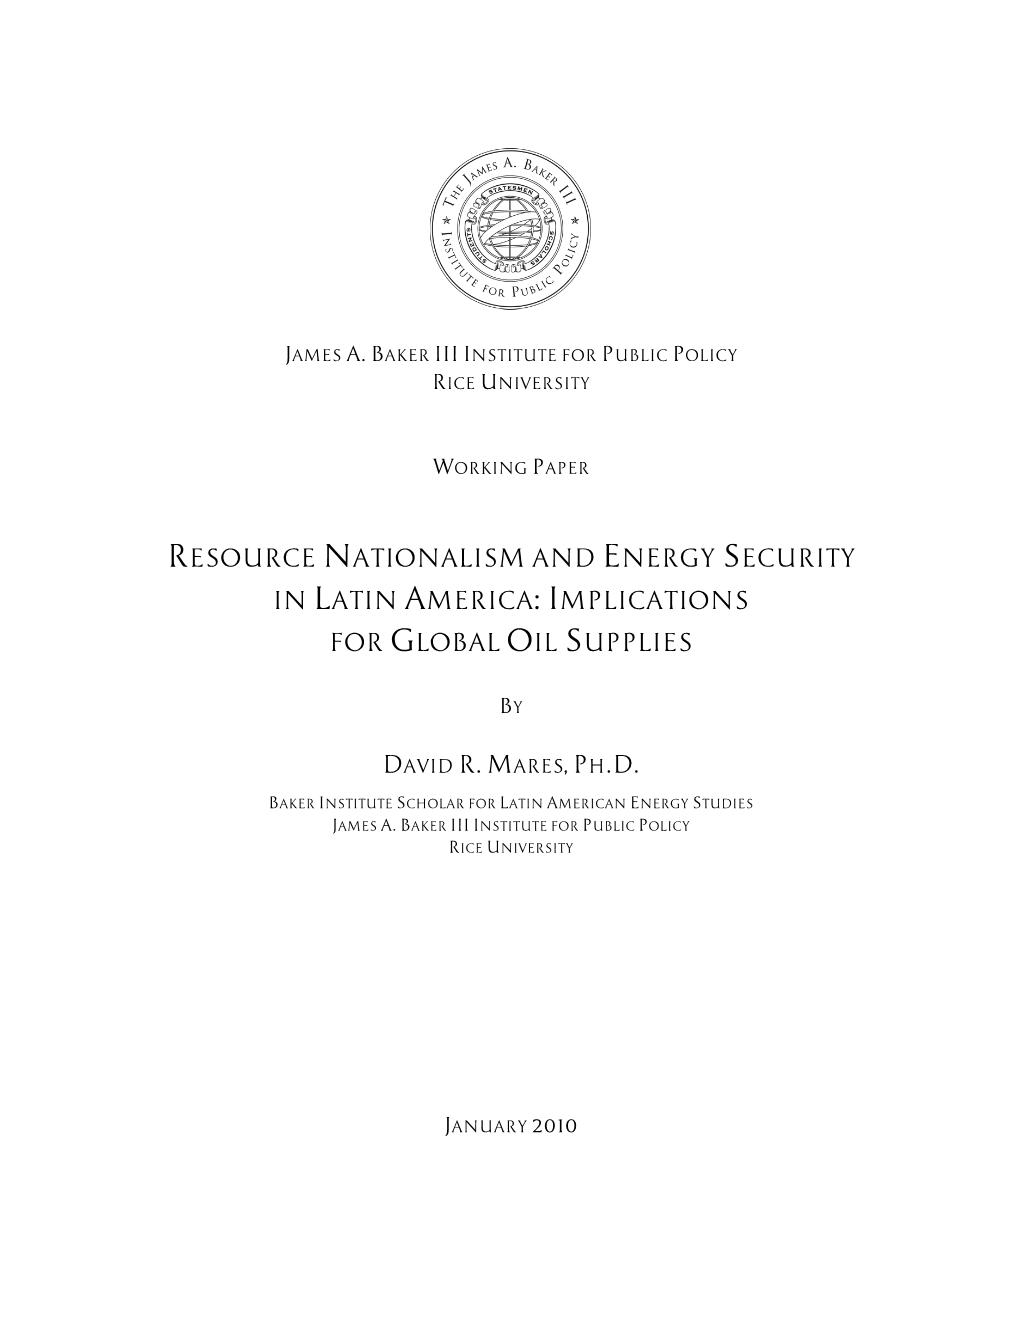 Resource Nationalism and Energy Security in Latin America: Implications for Global Oil Supplies